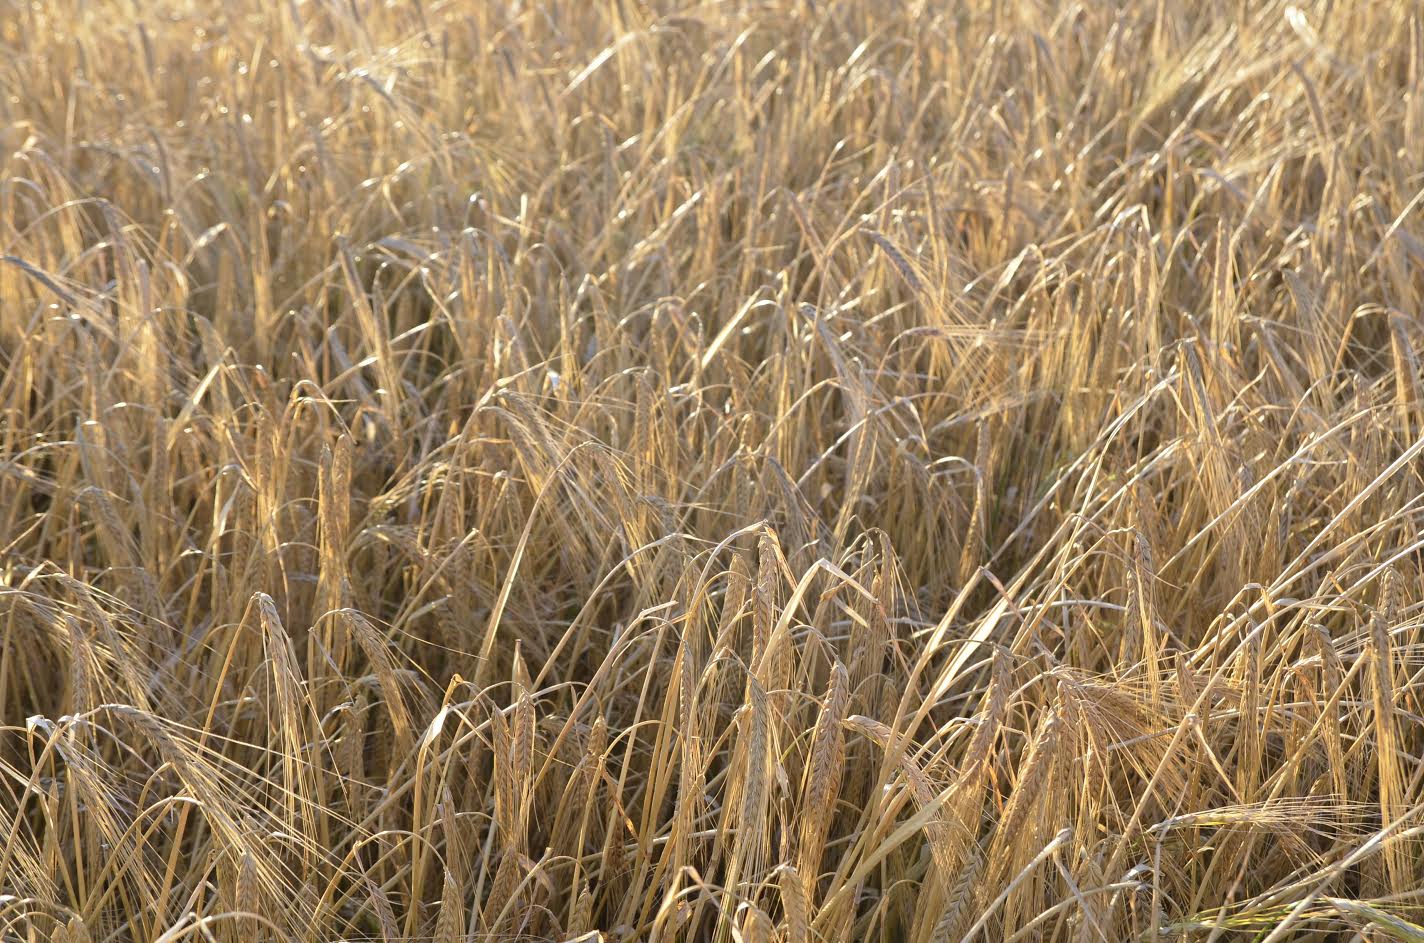 Naked barley hasn’t been a common crop since the Bronze Age